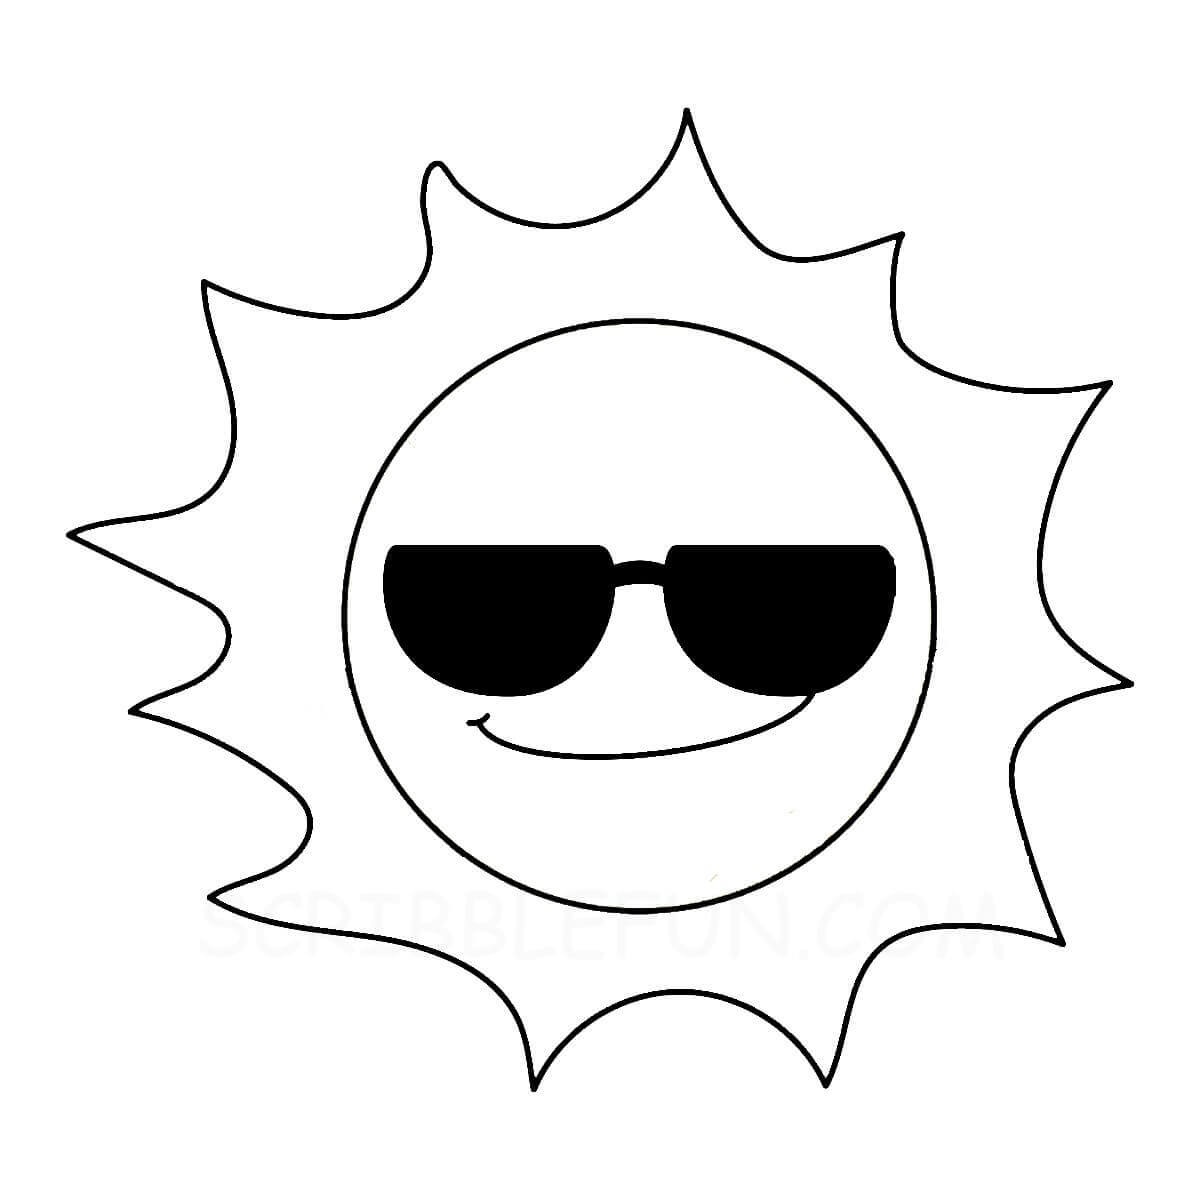 Cool sun coloring page